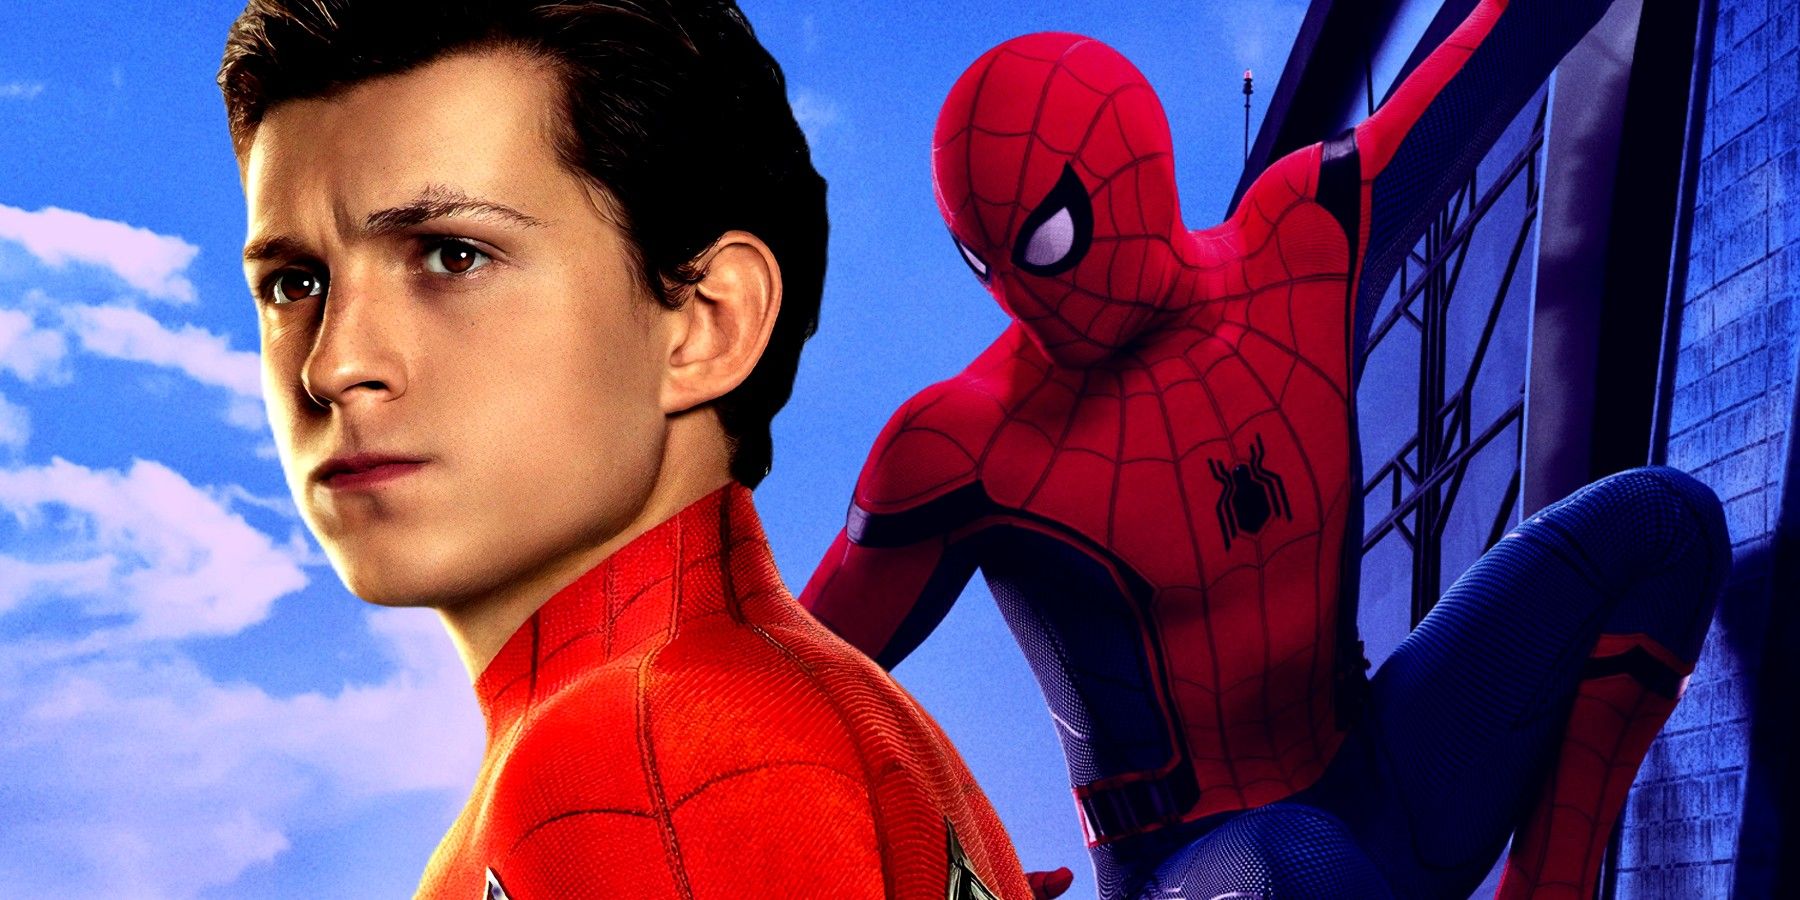 Spider-Man 4 even better than Homecoming, blended image with Tom Holland's Spider-Man clinging to a building